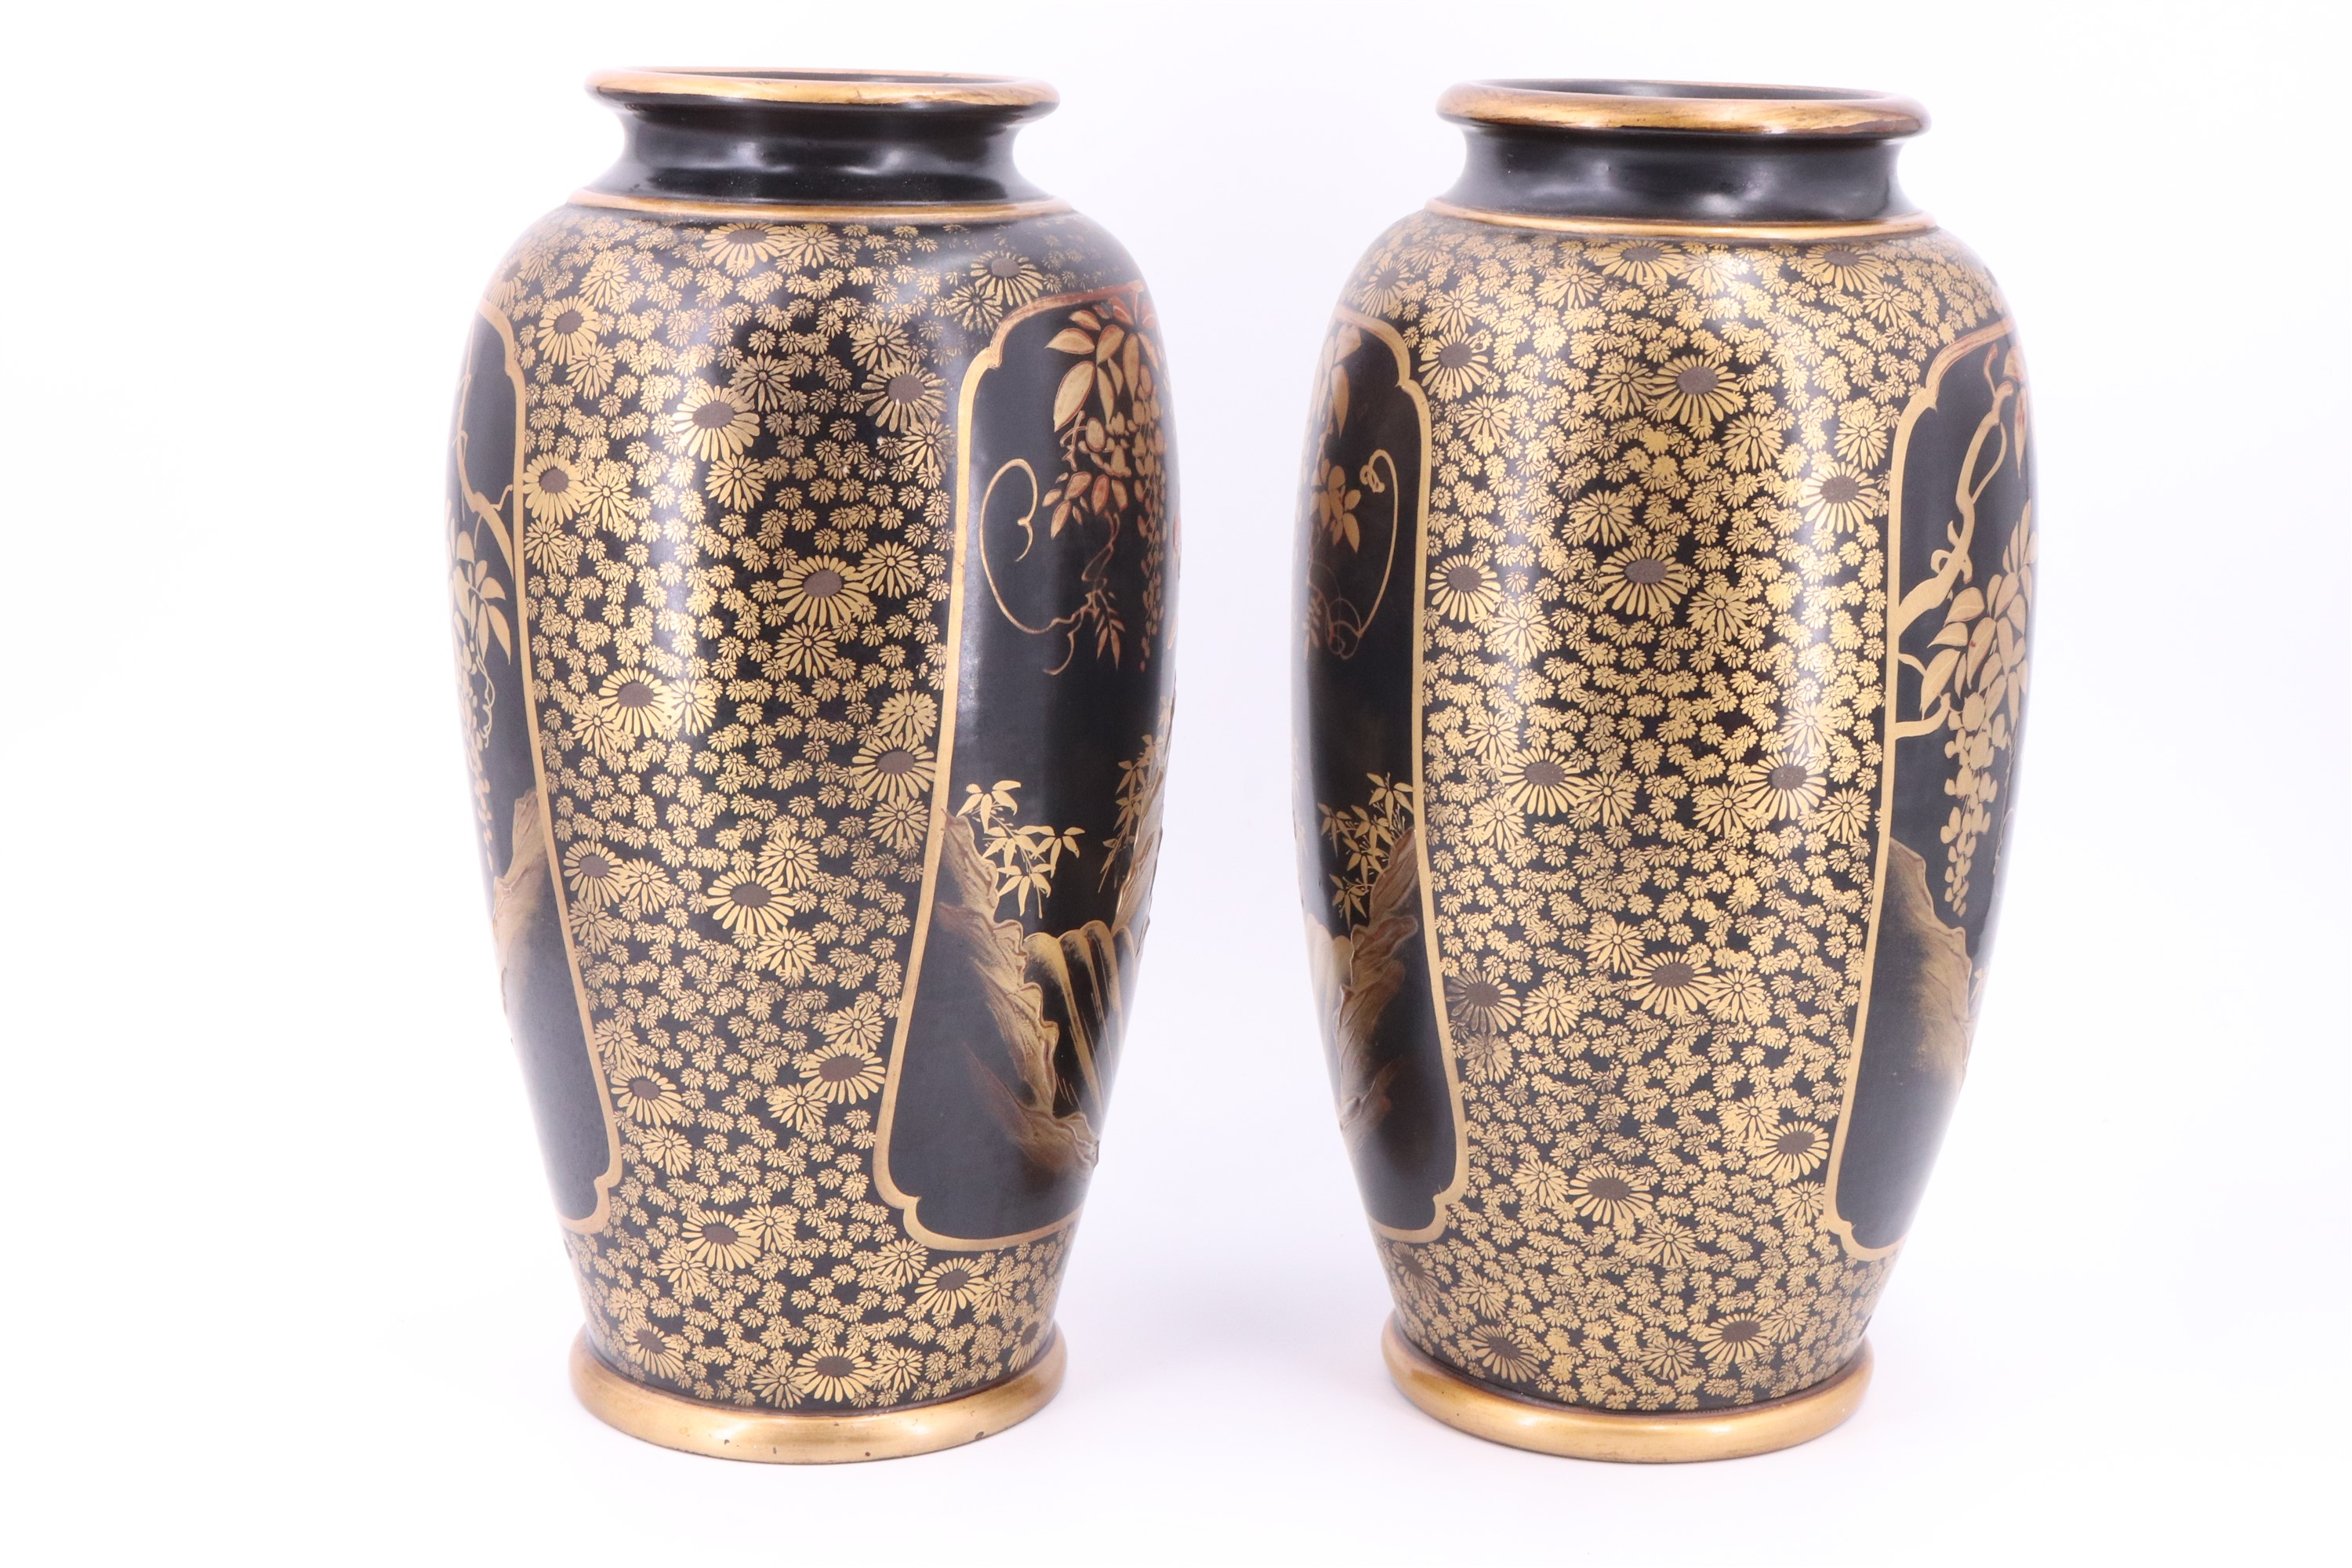 A pair of late Meiji / Taisho Japanese oviform vases, raised-gilt decorated in depiction of birds - Image 4 of 6